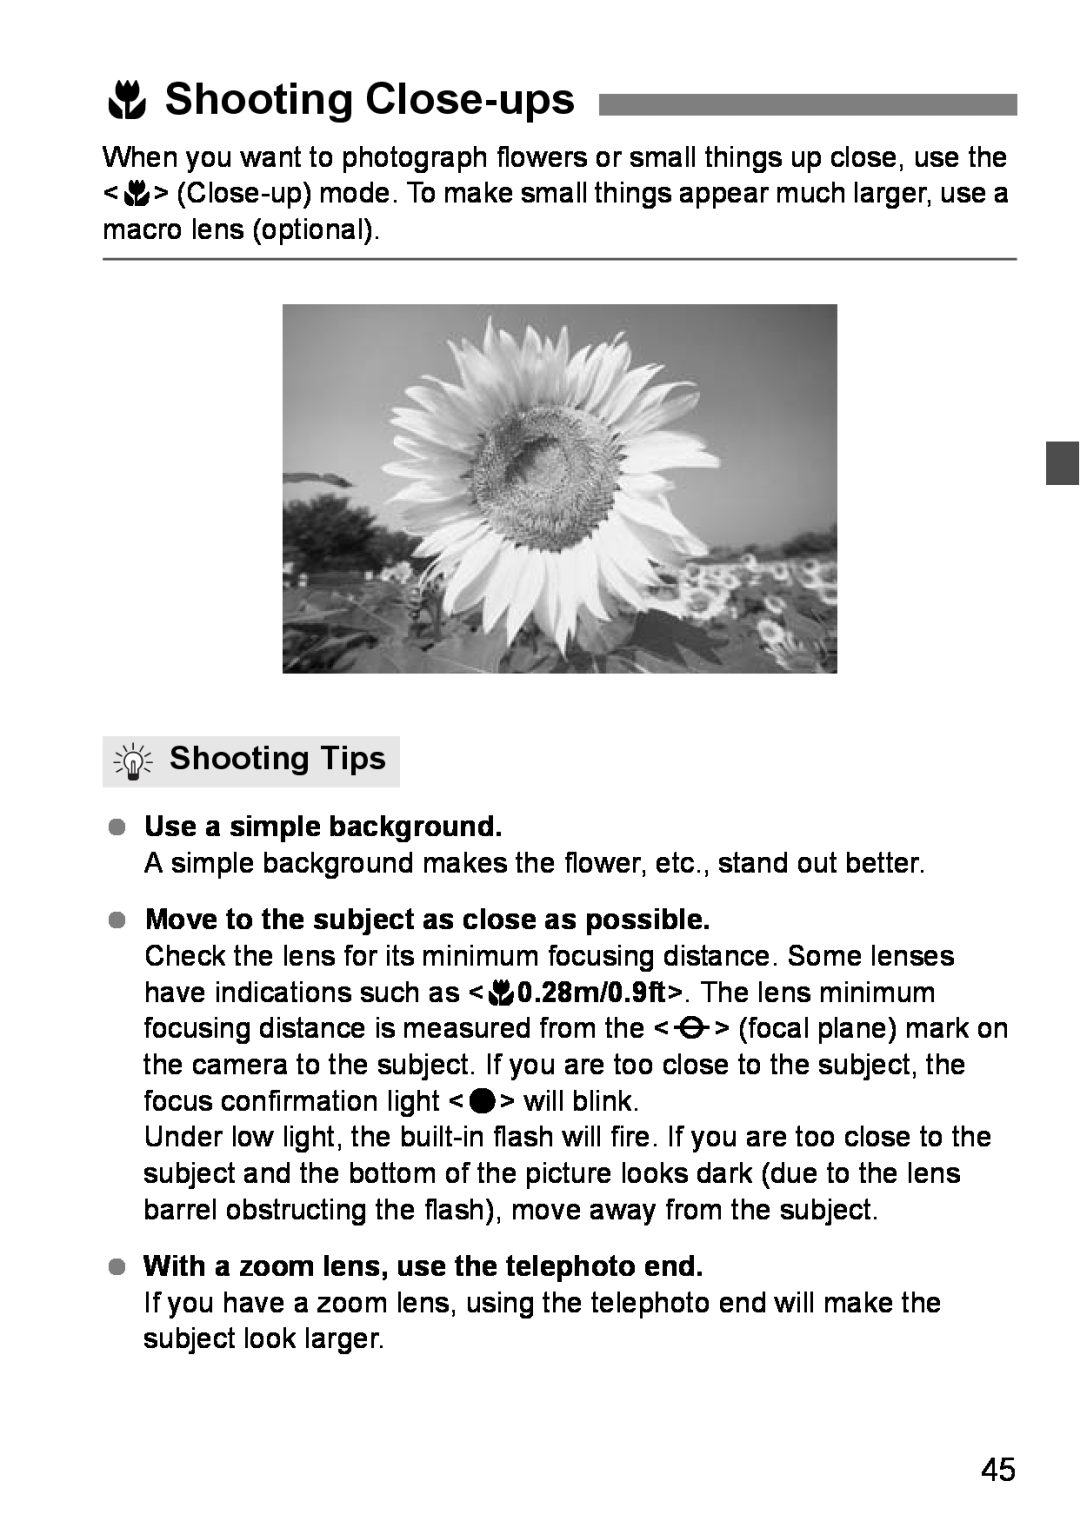 Canon EOS DIGITAL REBEL XTI instruction manual 4Shooting Close-ups, Shooting Tips, Use a simple background 